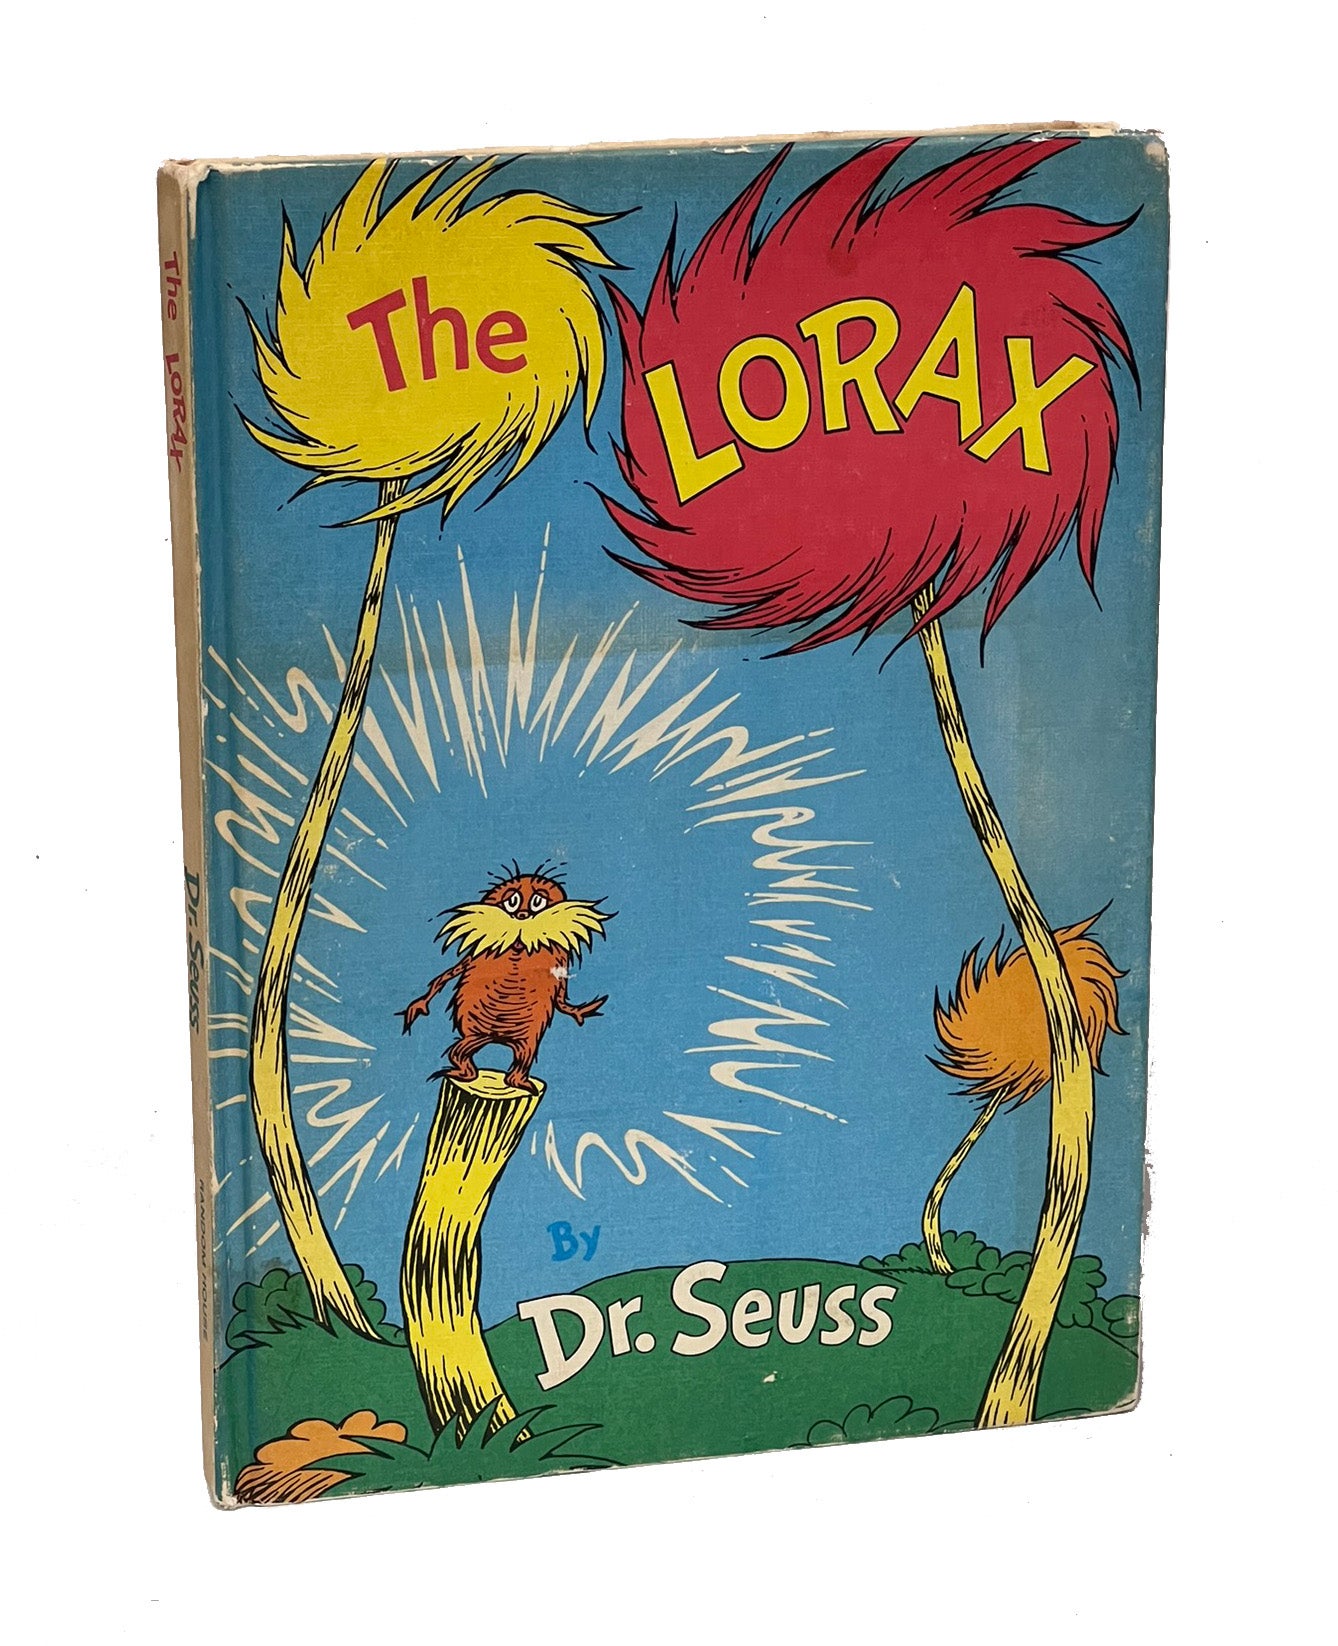 The Lorax - Seuss Dr, Theodore Seuss Geisel - First Edition